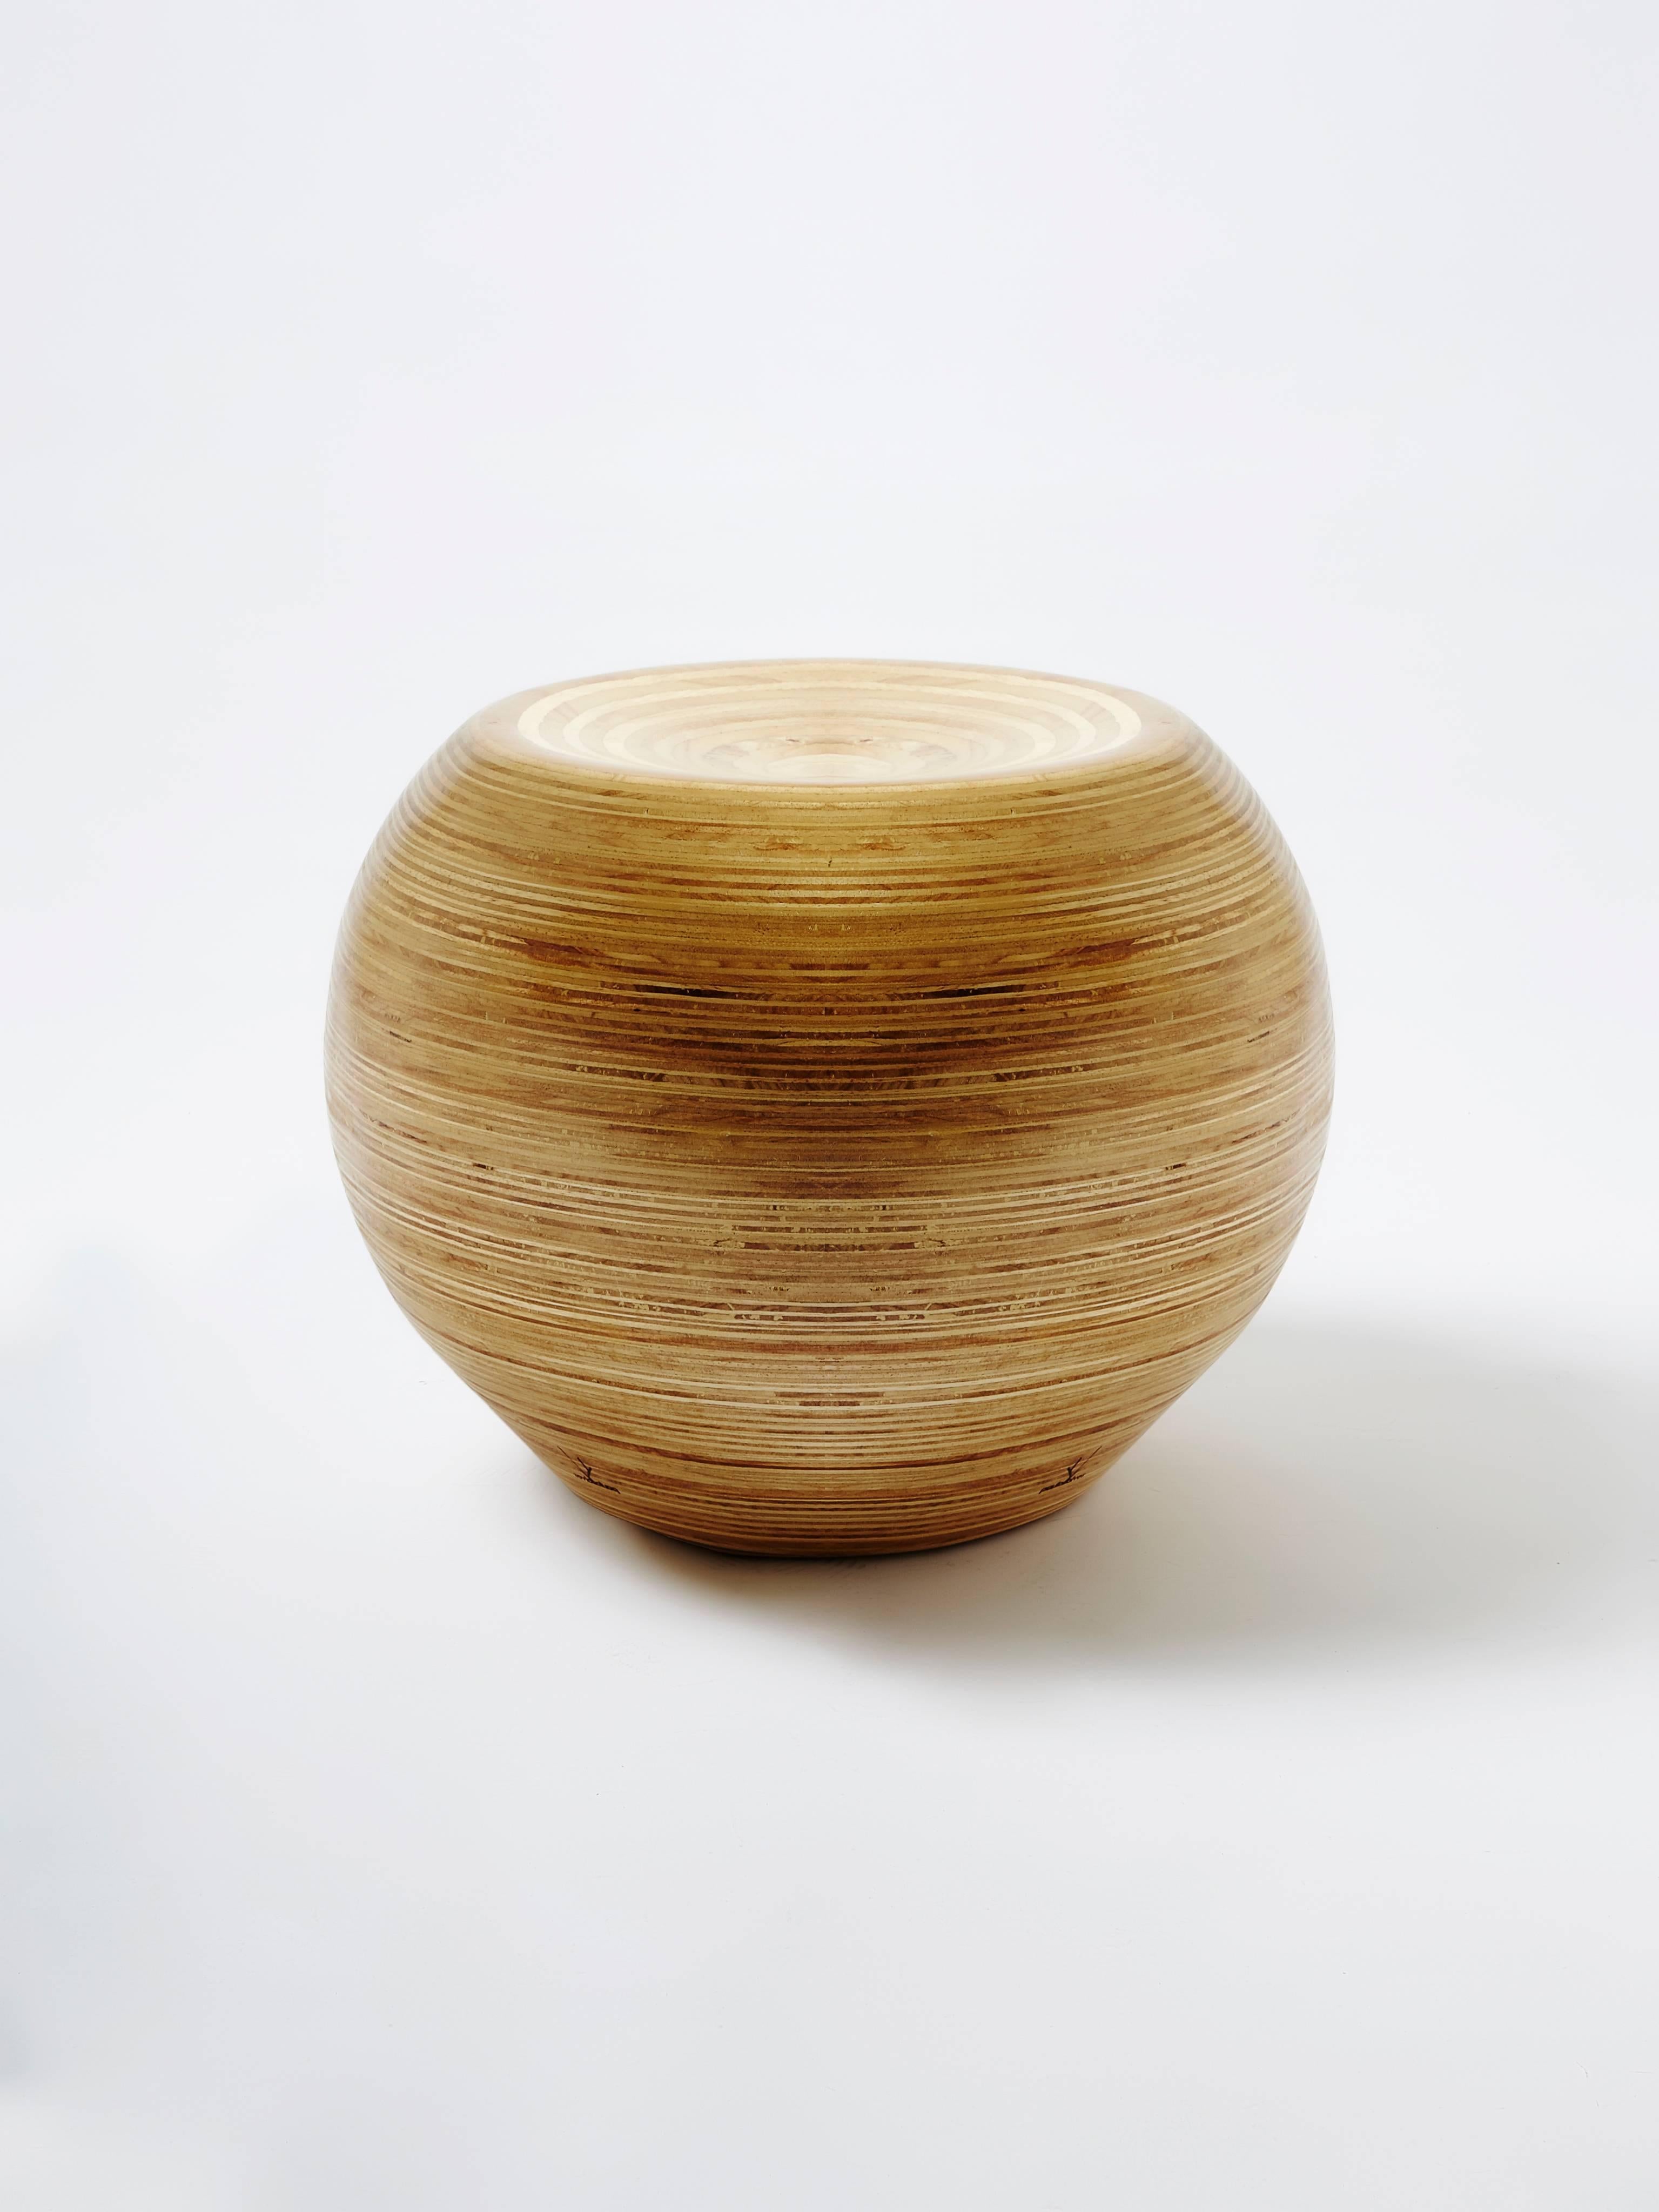 Bola Pouf in Sumaúma plywood with concave seat by Paulo Alves.

Handcrafted in Brazil
 
Dimensions: 50 cm x 40 cm x 50 cm